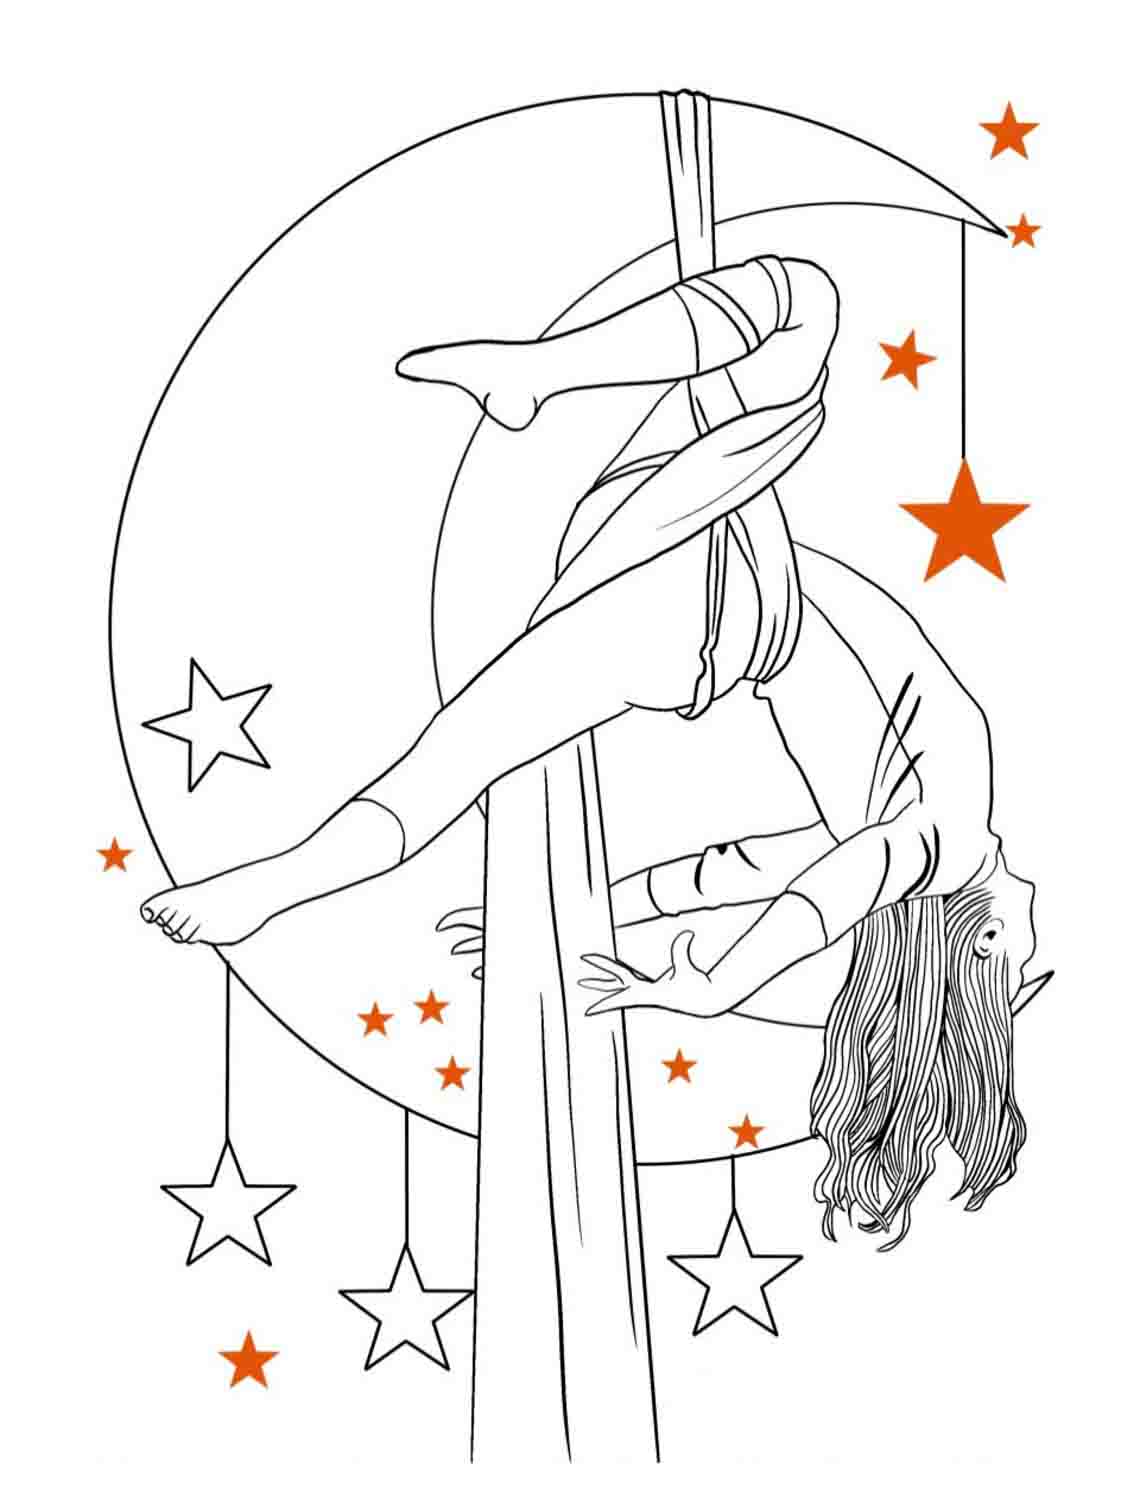 A page from the Bodies In Motion Coloring Book that has a woman hanging from silk fabric that is attached to a moon with stars.